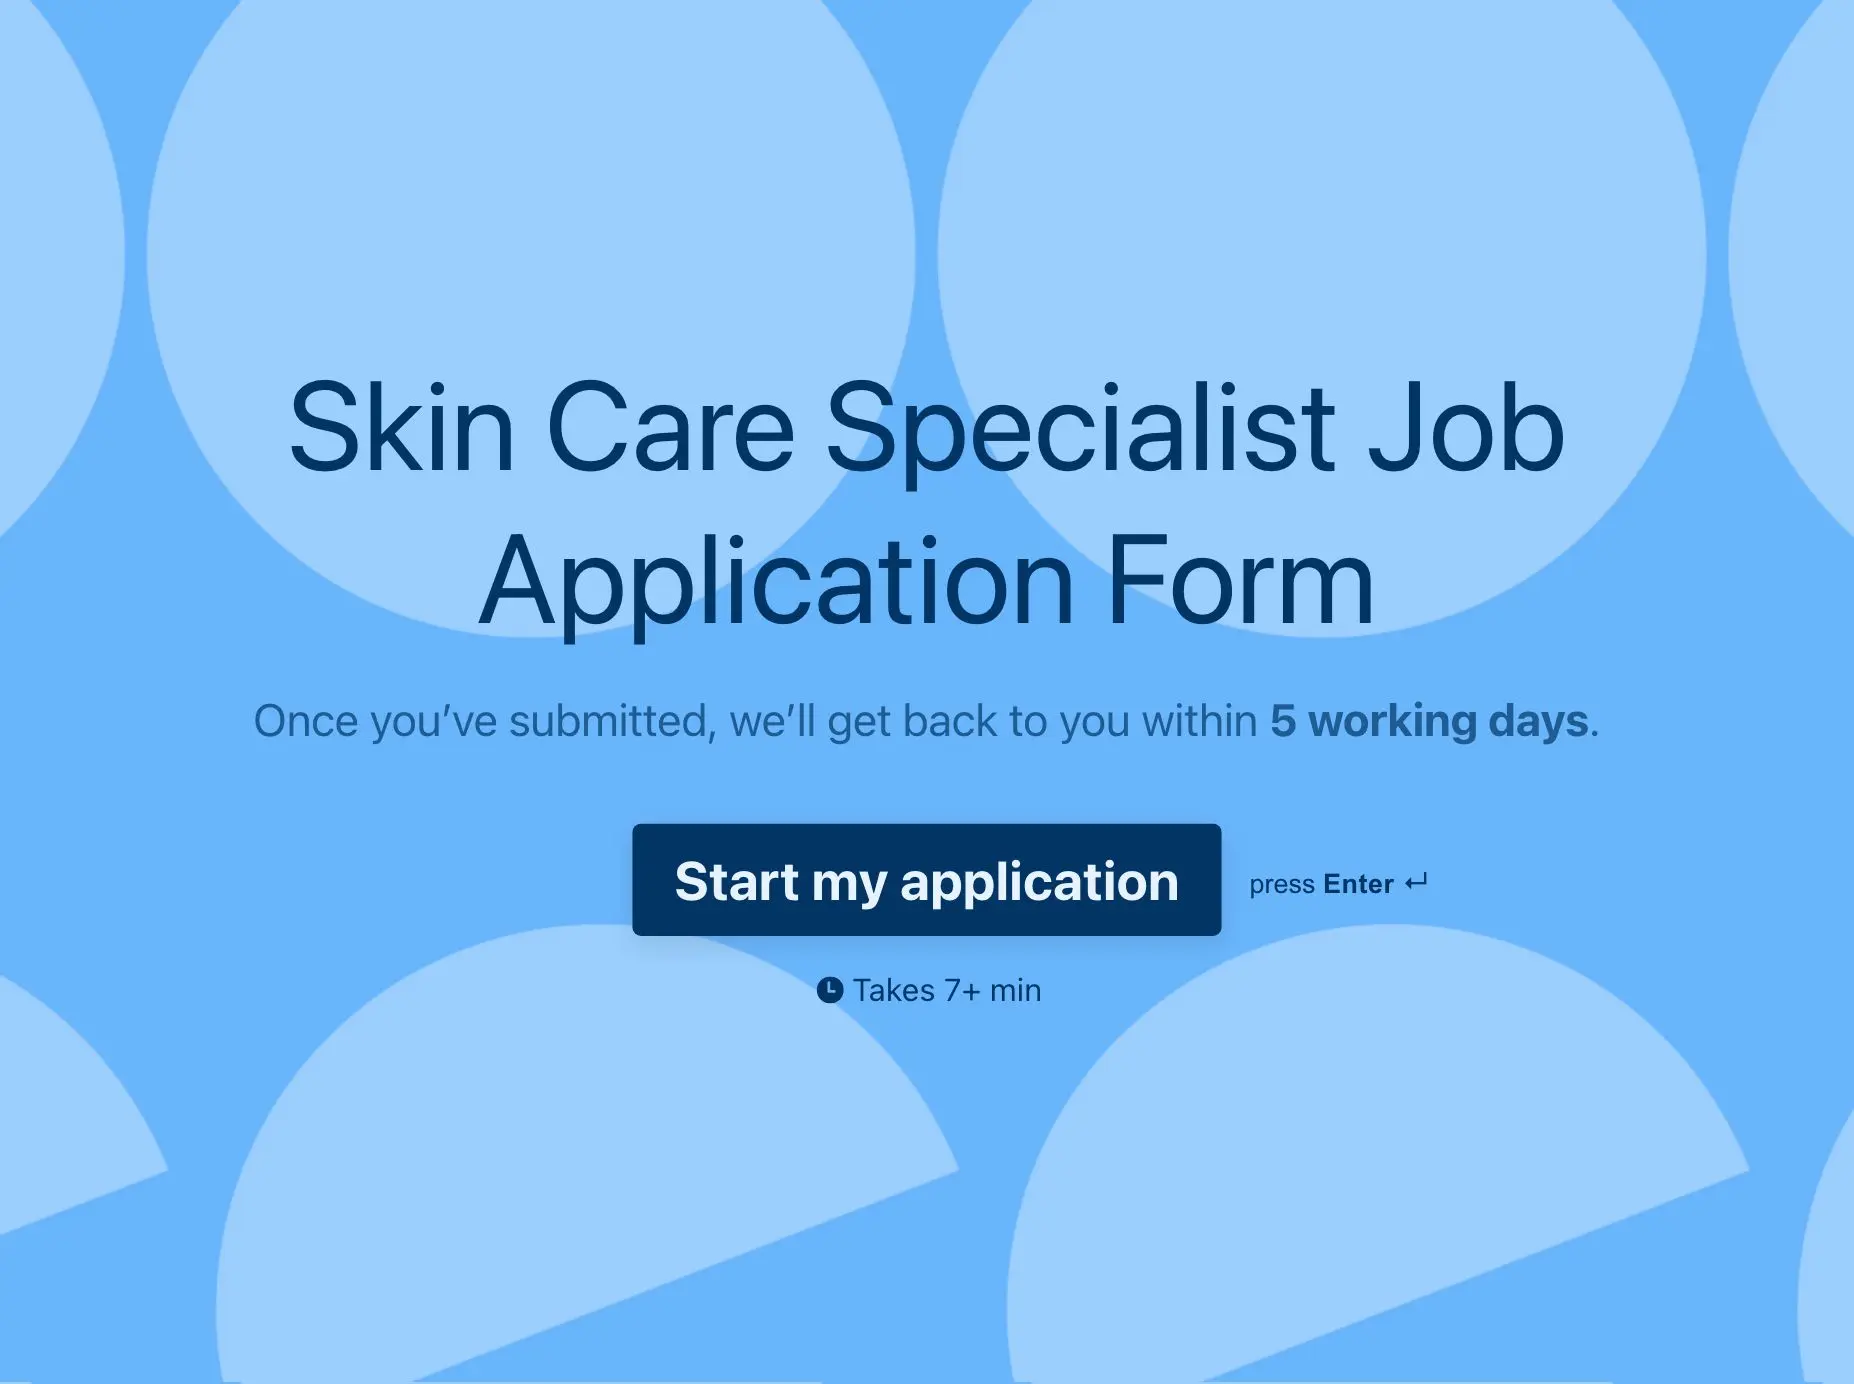 Skin Care Specialist Job Application Form Template Hero